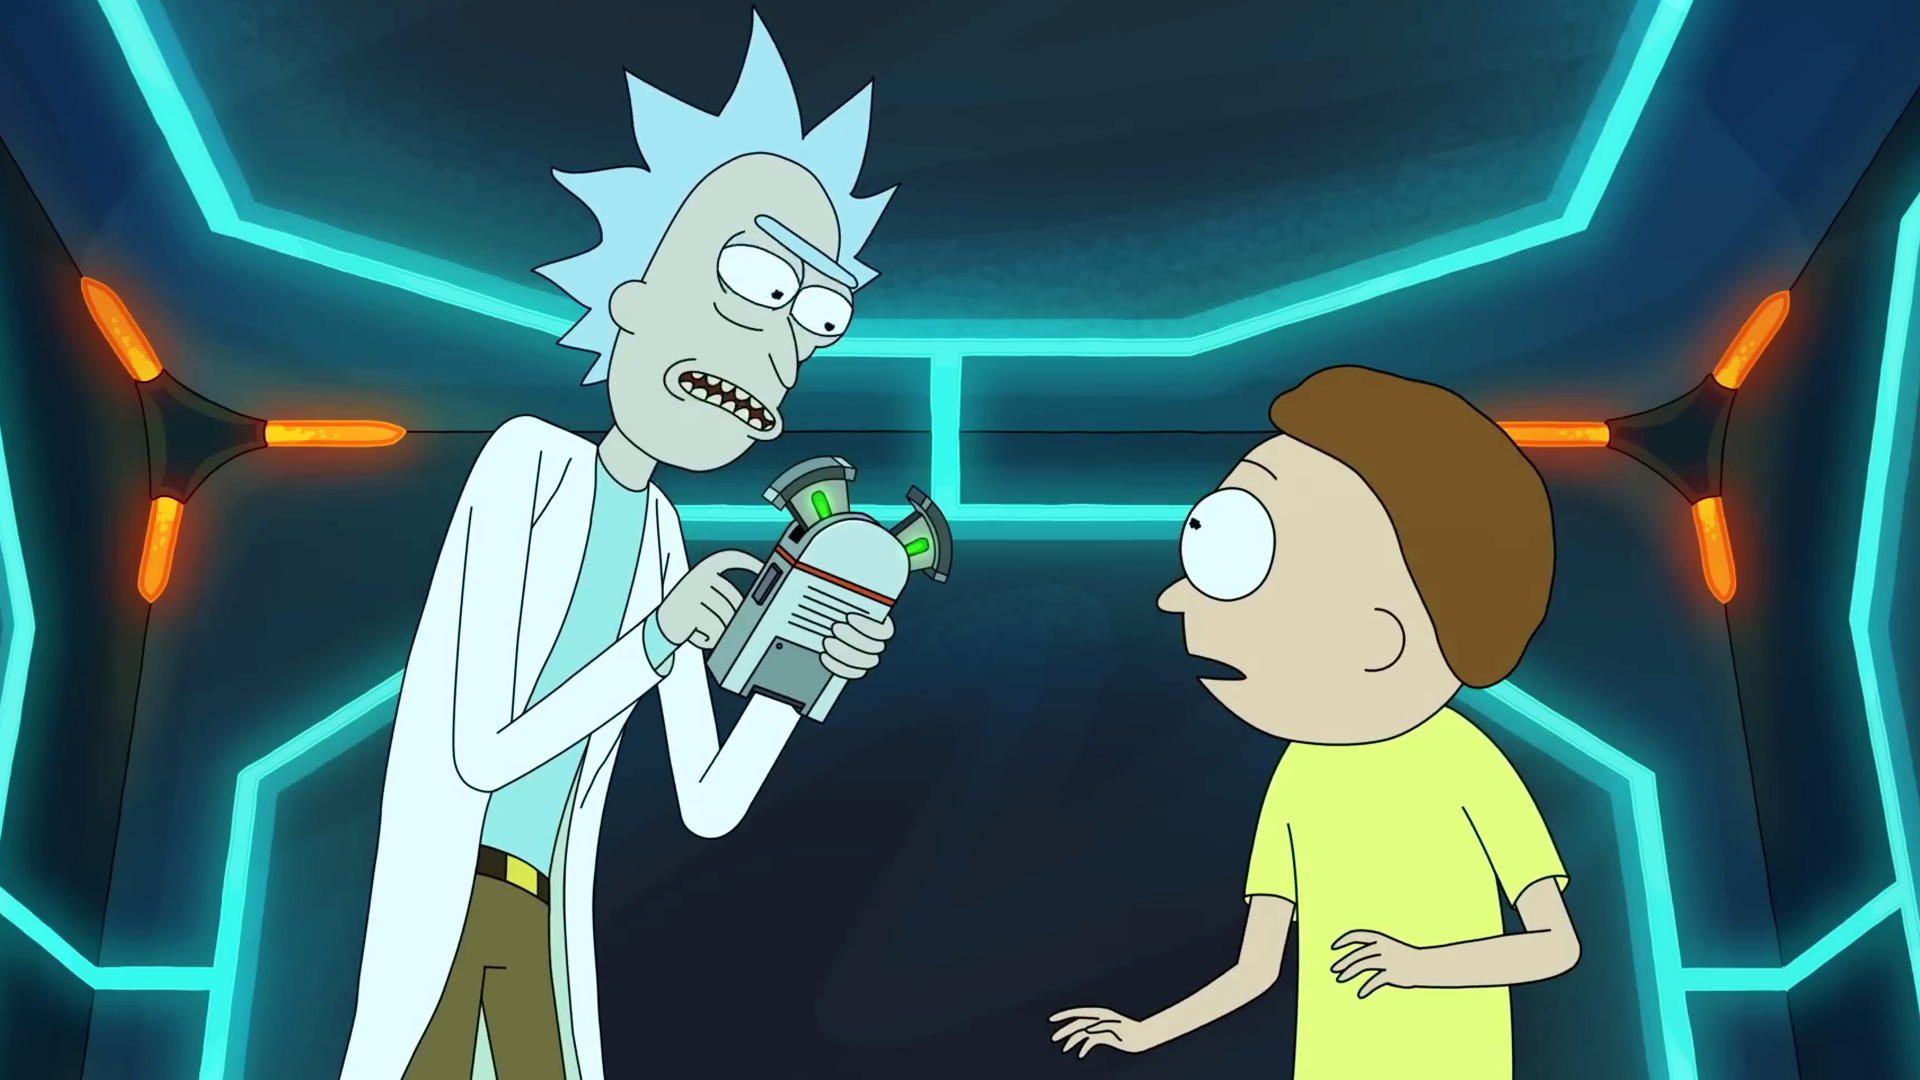 How to watch 'Rick and Morty' Season 7 for free online - Beem